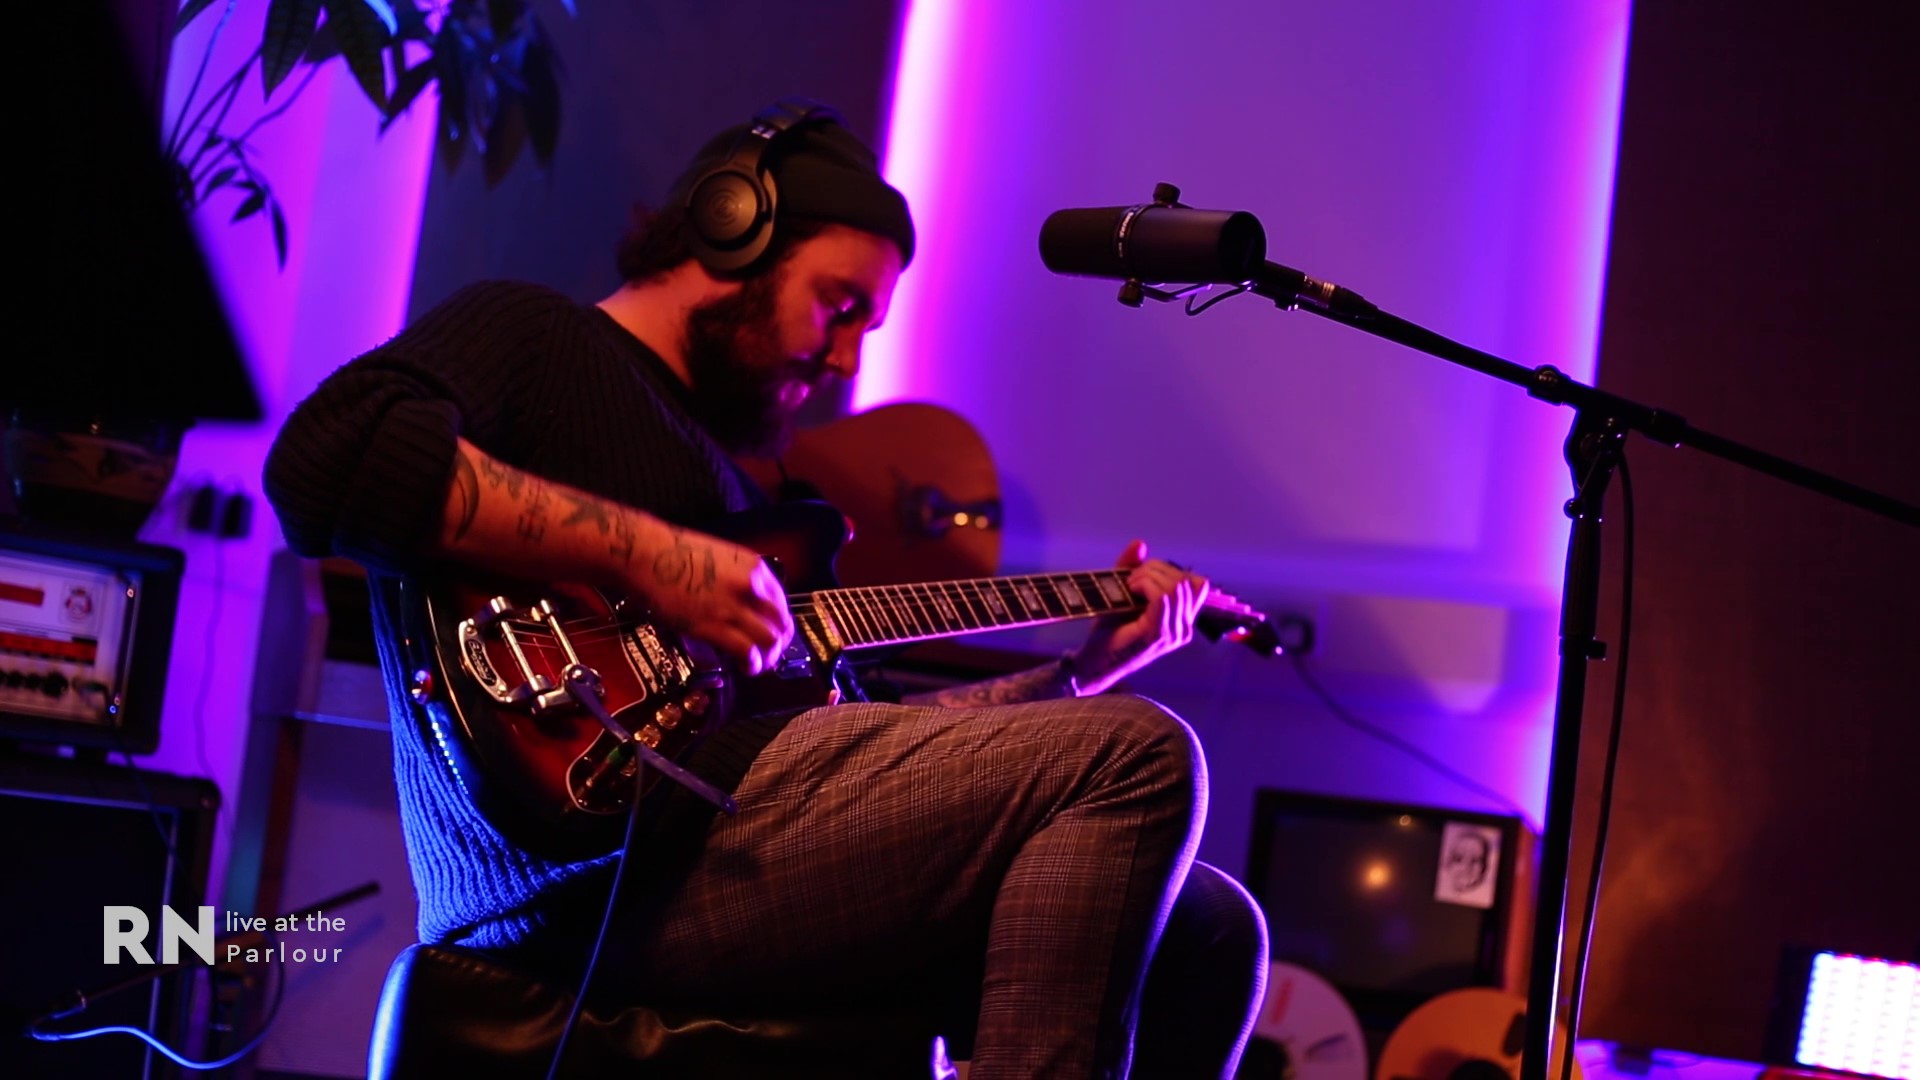 Jak James plays a Wicked Game in his gorgeous, grungy session